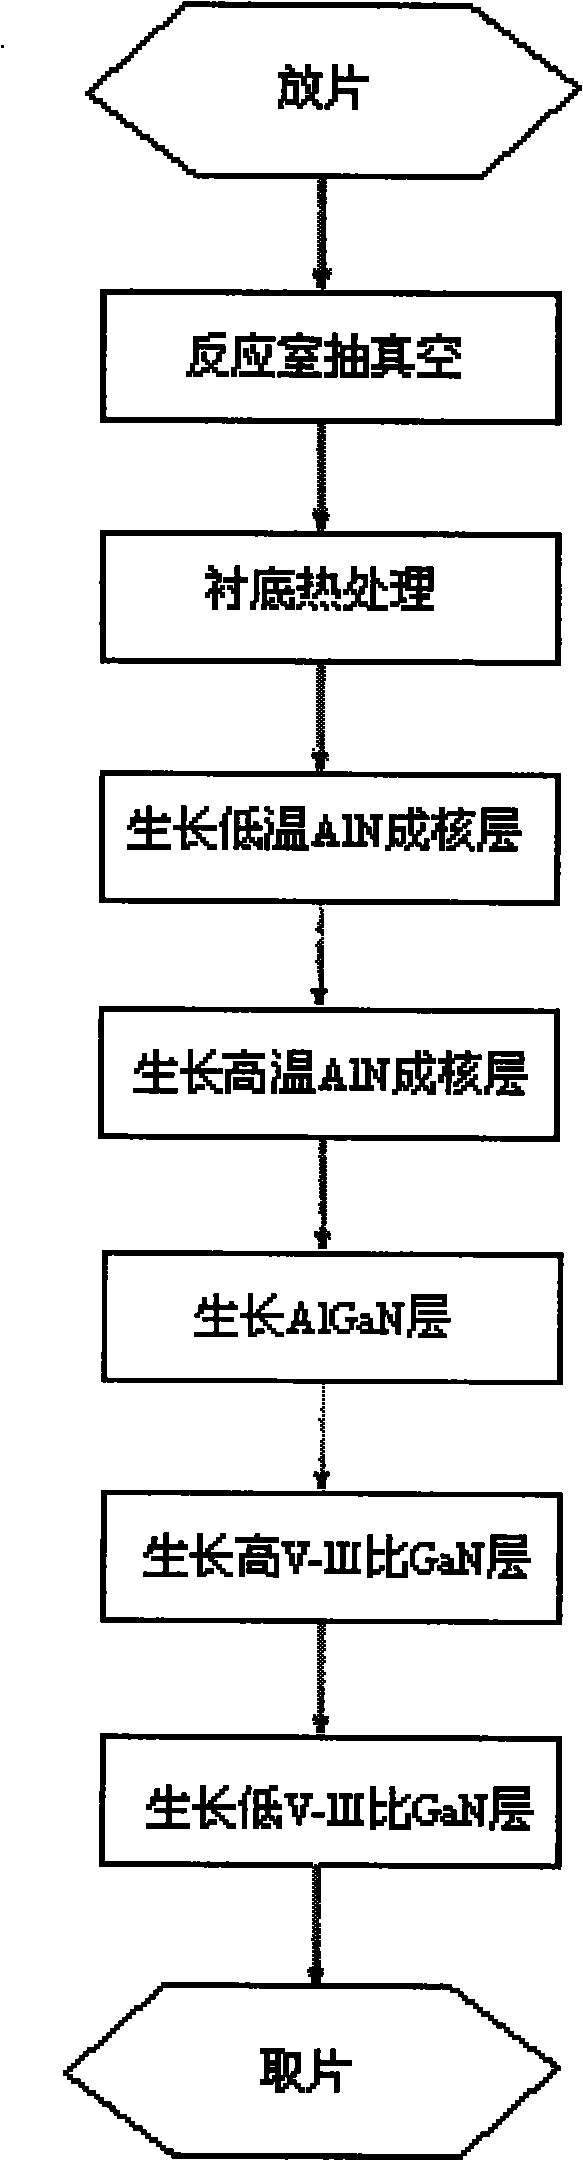 Method for growing semi-polar GaN based on Al2O3 substrate with m sides